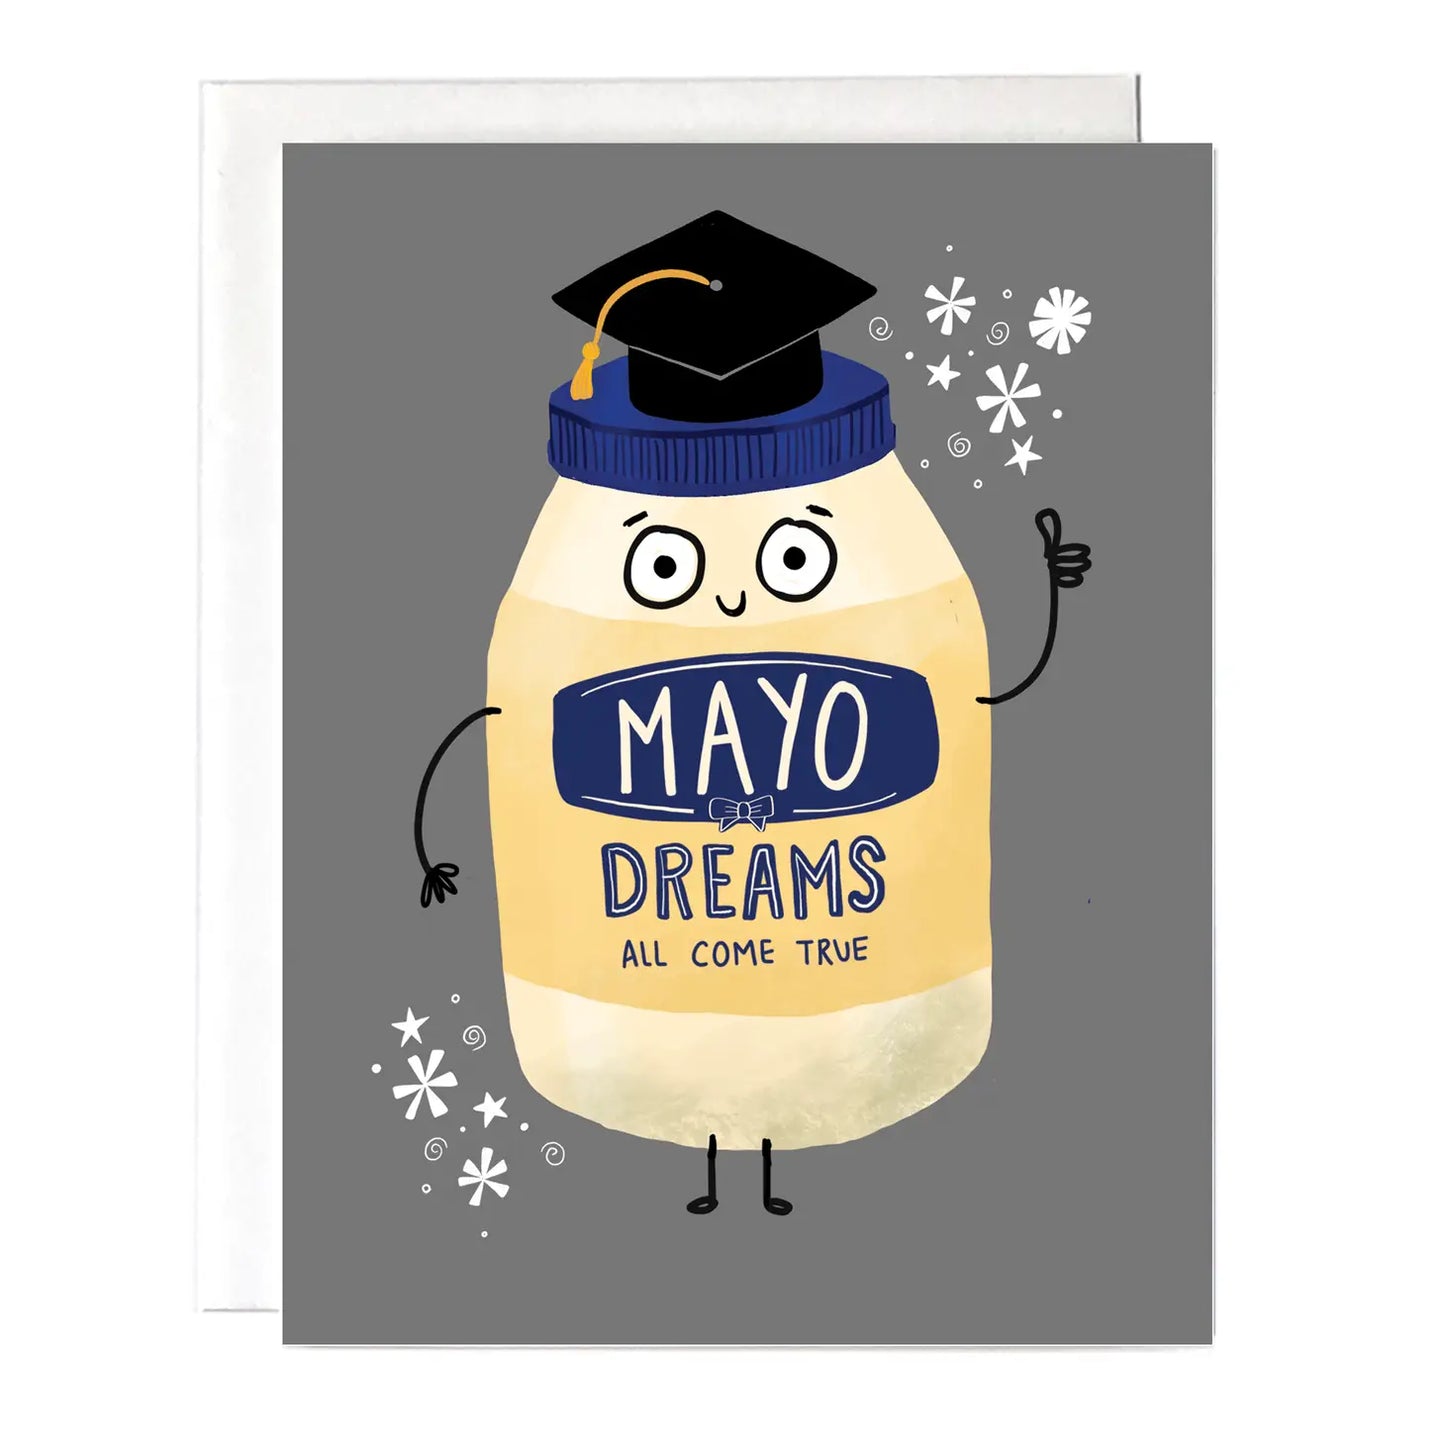 grey greeting card with a bottle of mayonaise wearing a graduation cap, label reads "Mayo Dreams All Come True"